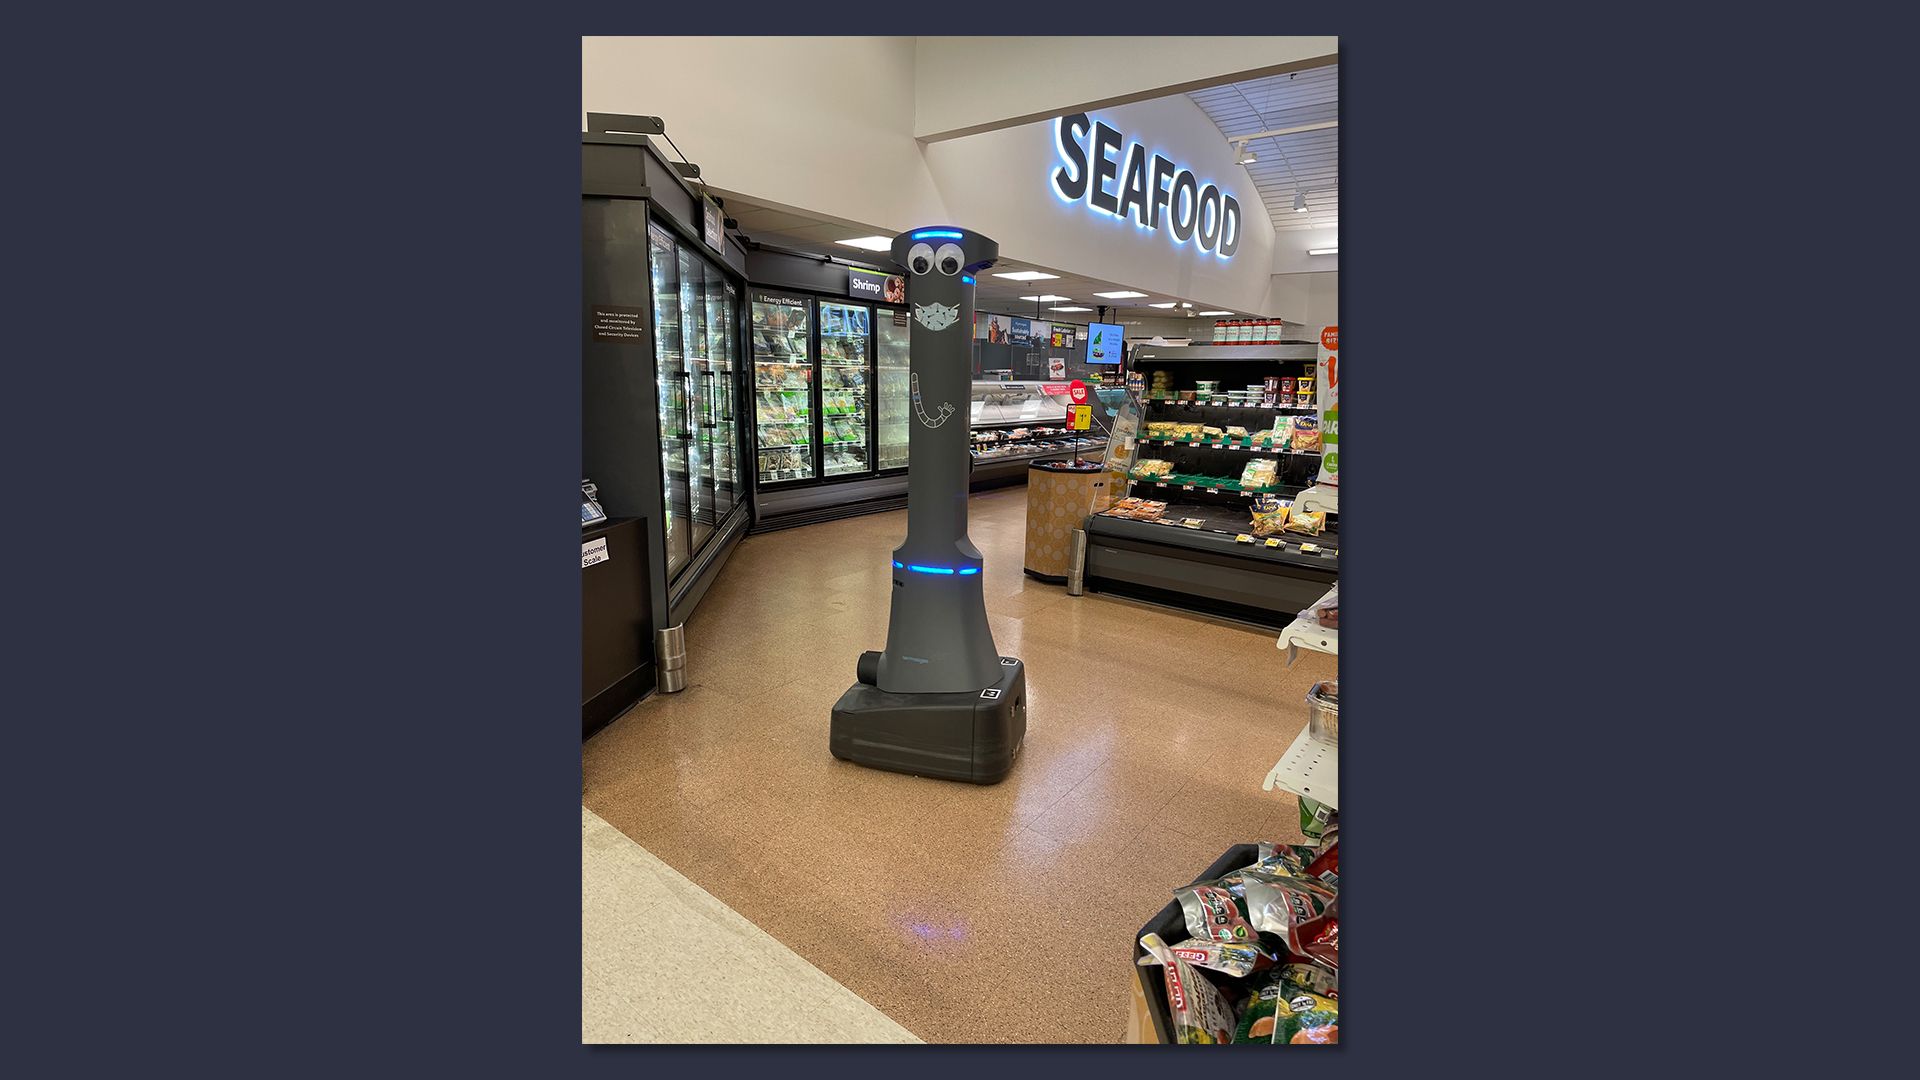 A wandering robot in a supermarket that cleans the floors and does security.